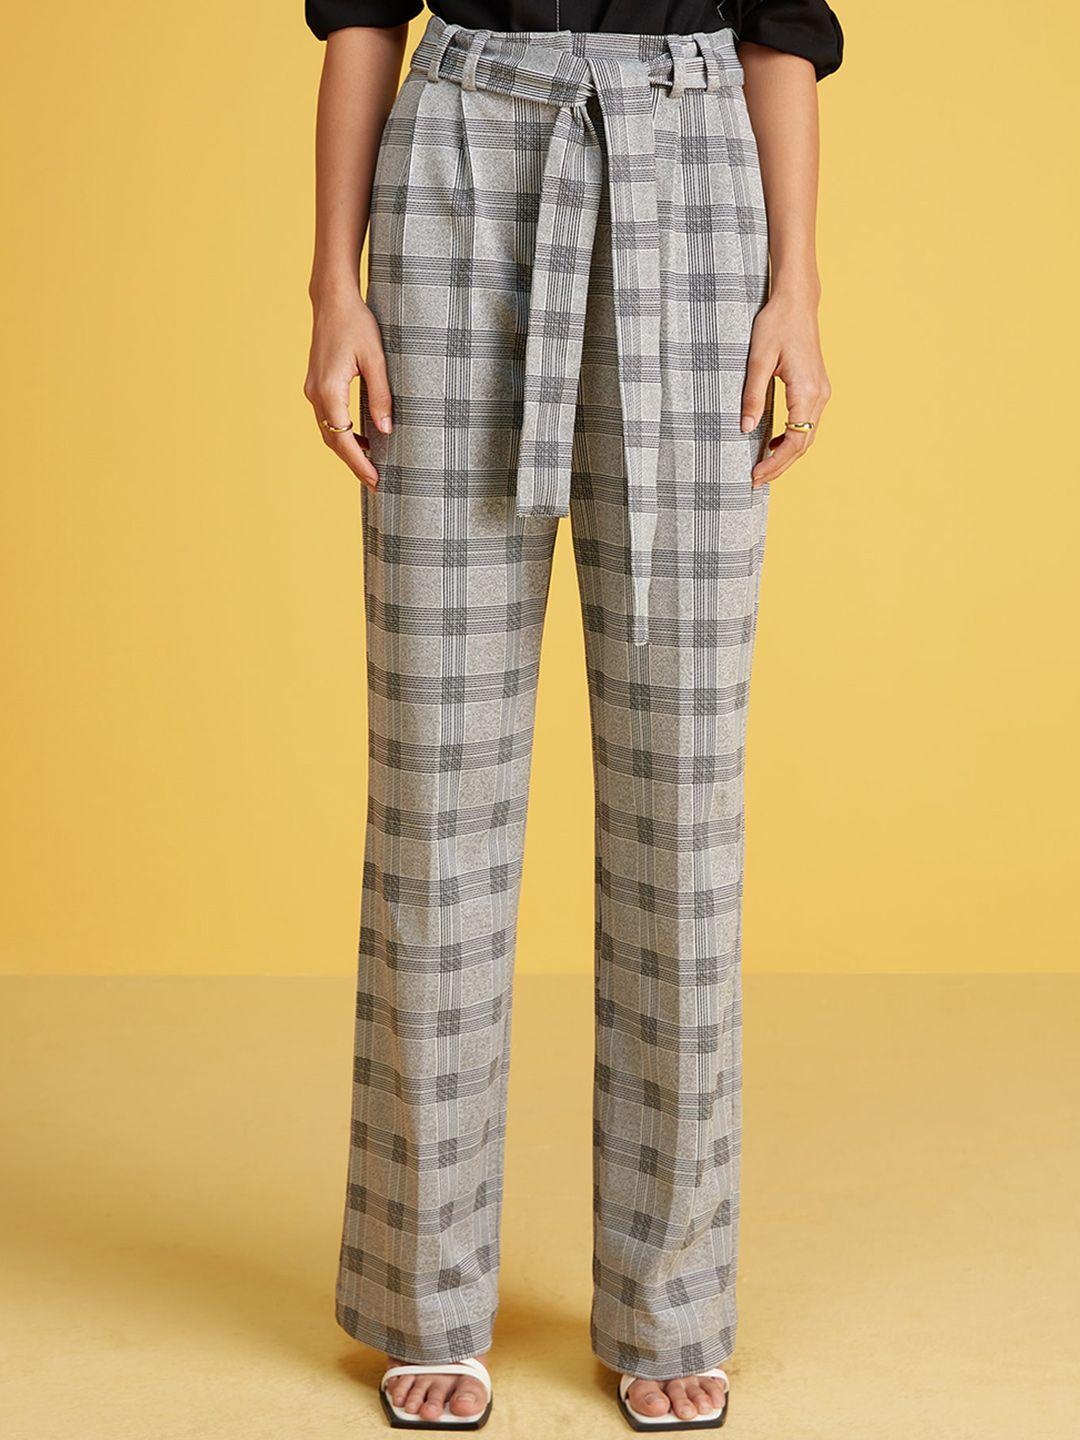 20dresses women grey and black checked high-rise trousers